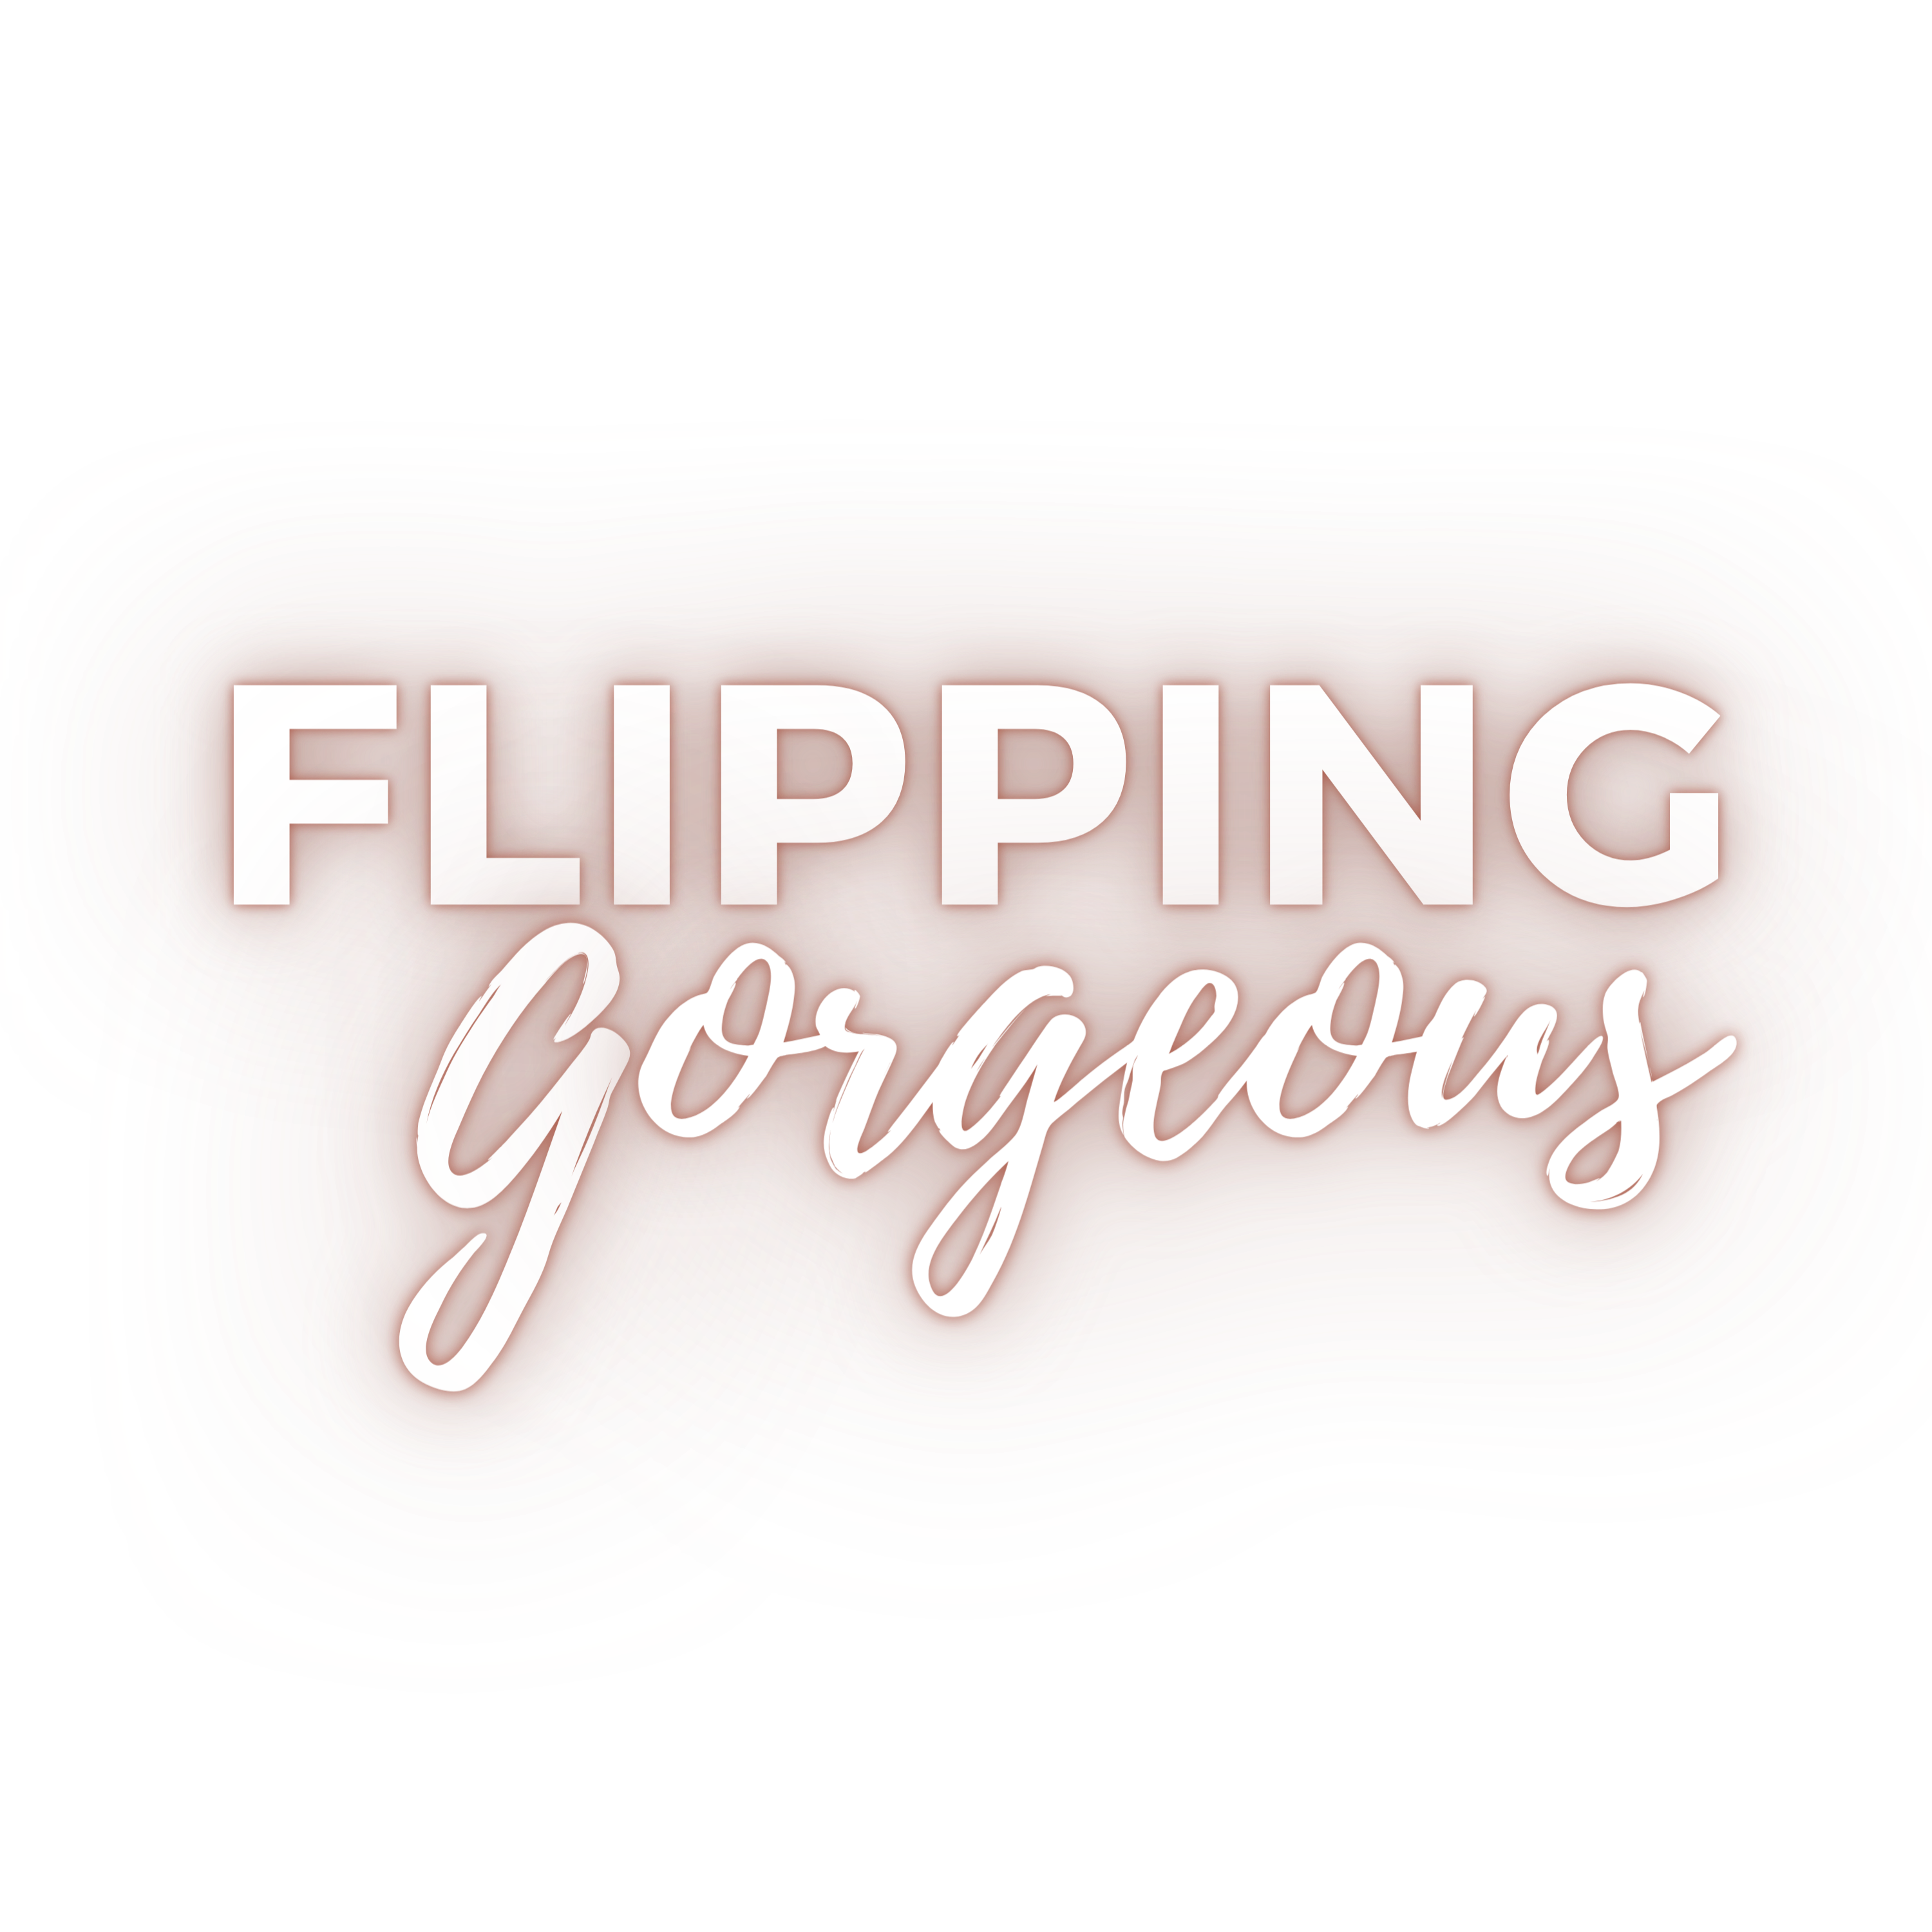 Copy of Flipping gorgeous (1)